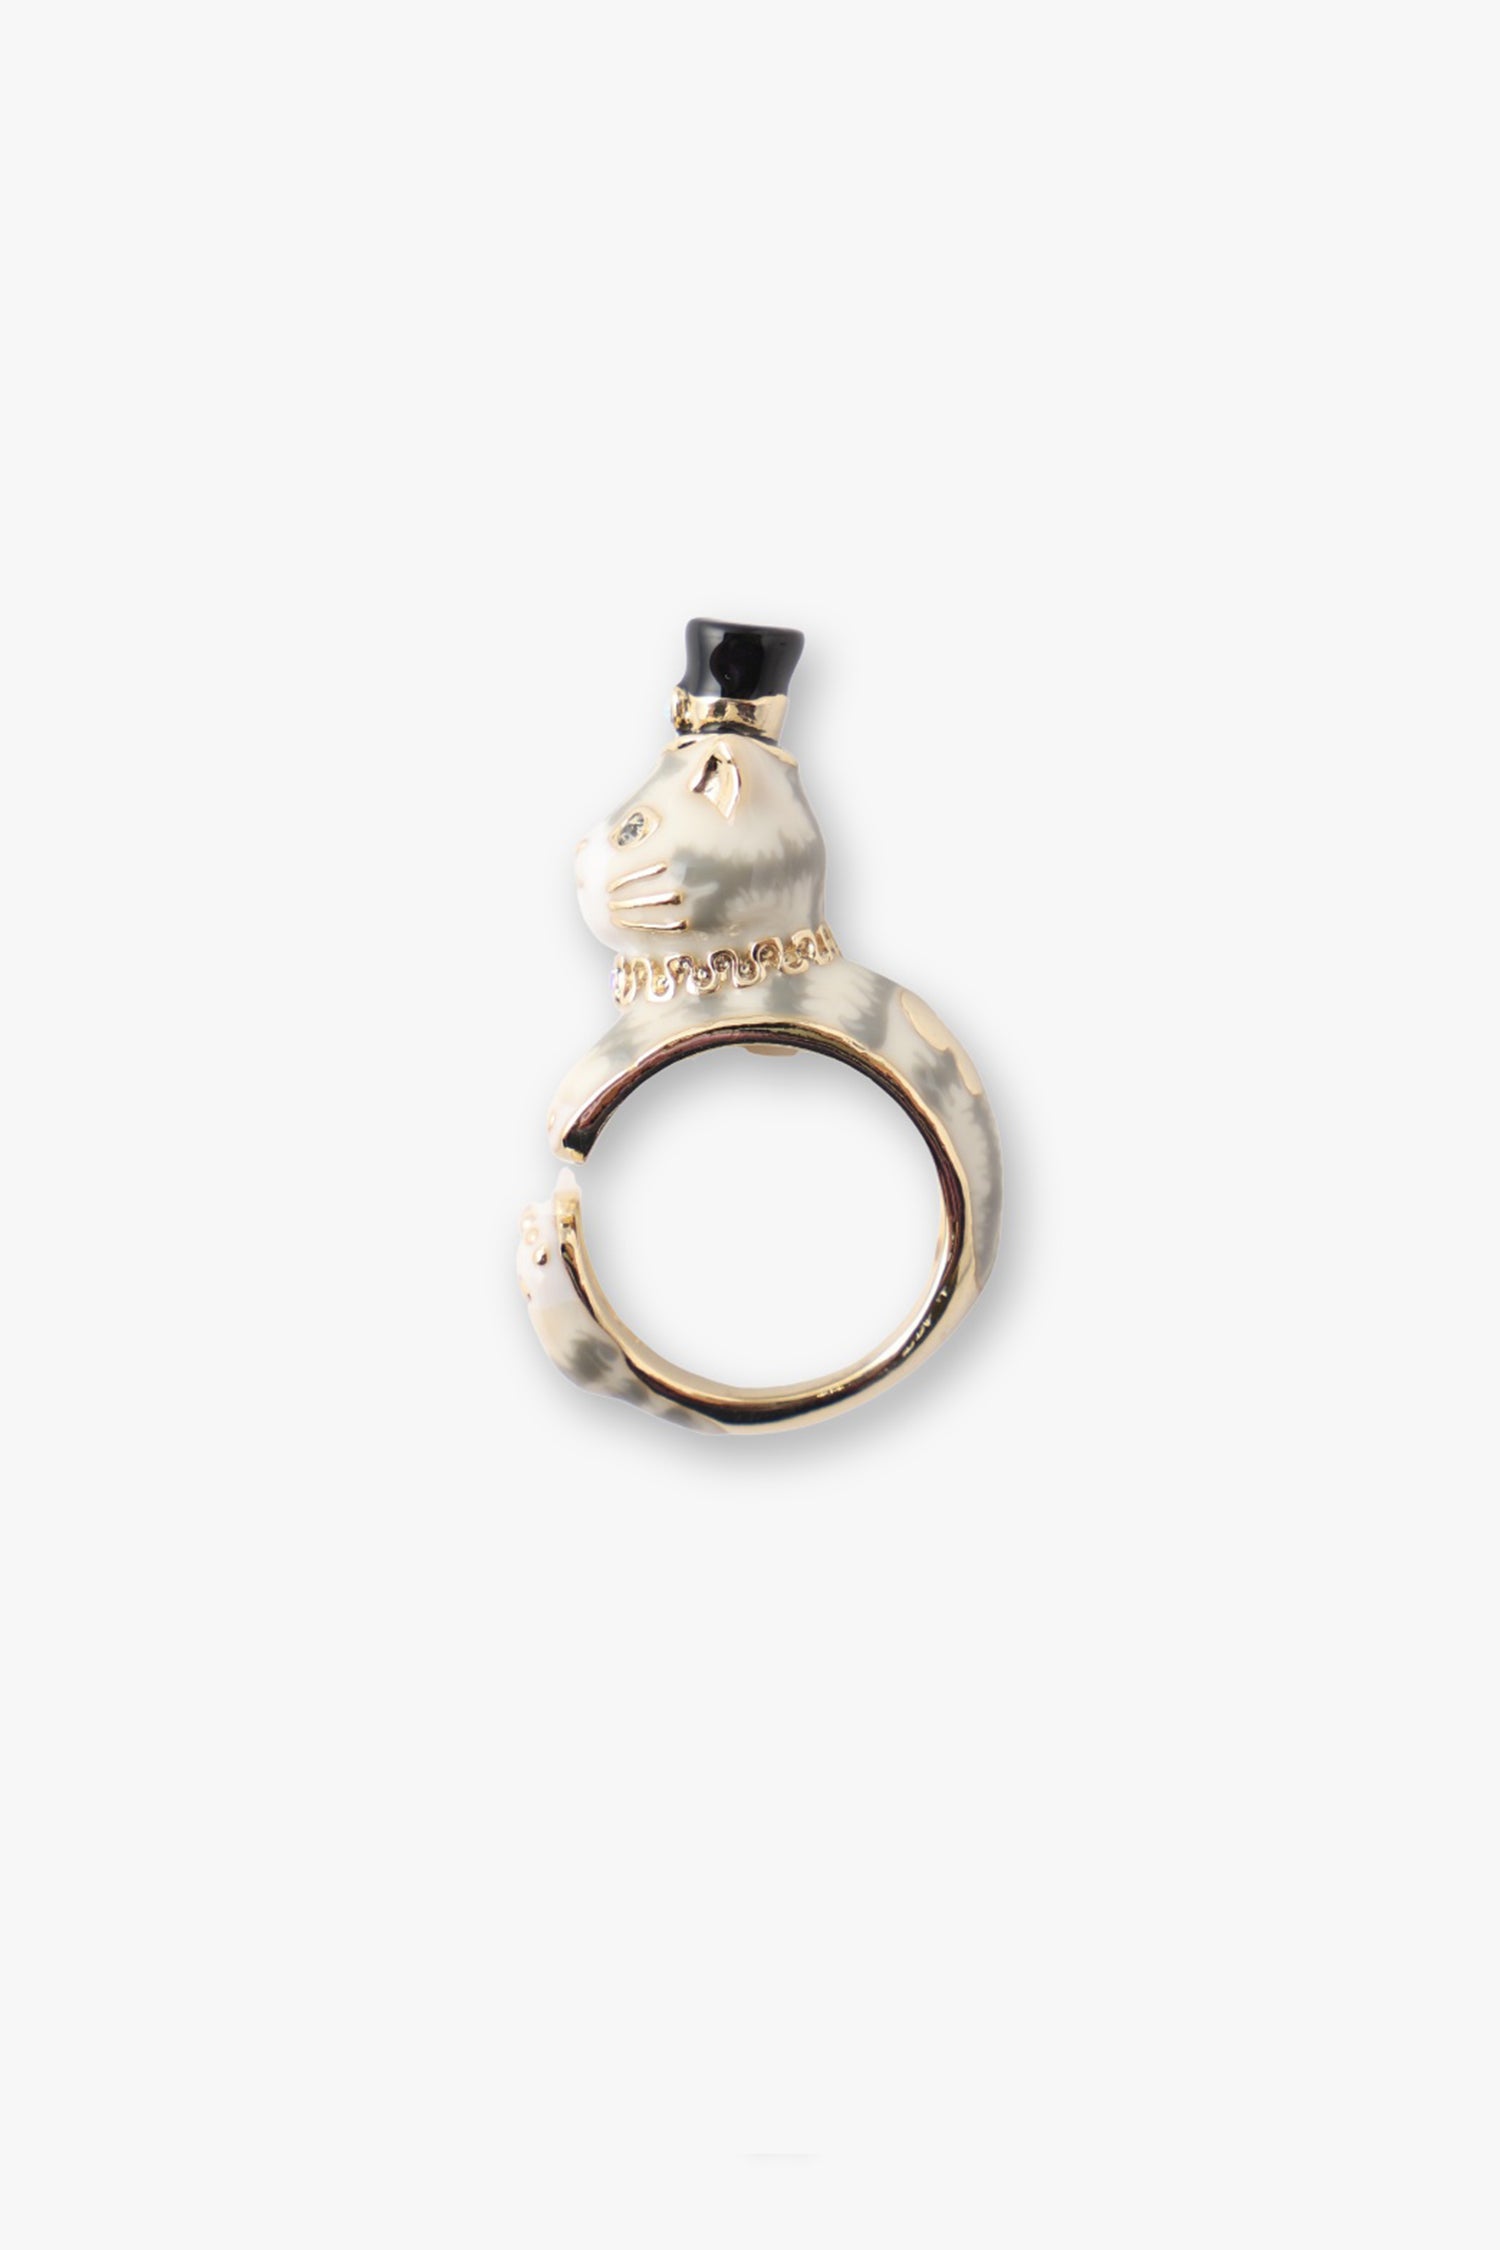 Black Hatted Cat Ring Gold, golden edges on legs to have a round effect to the ring